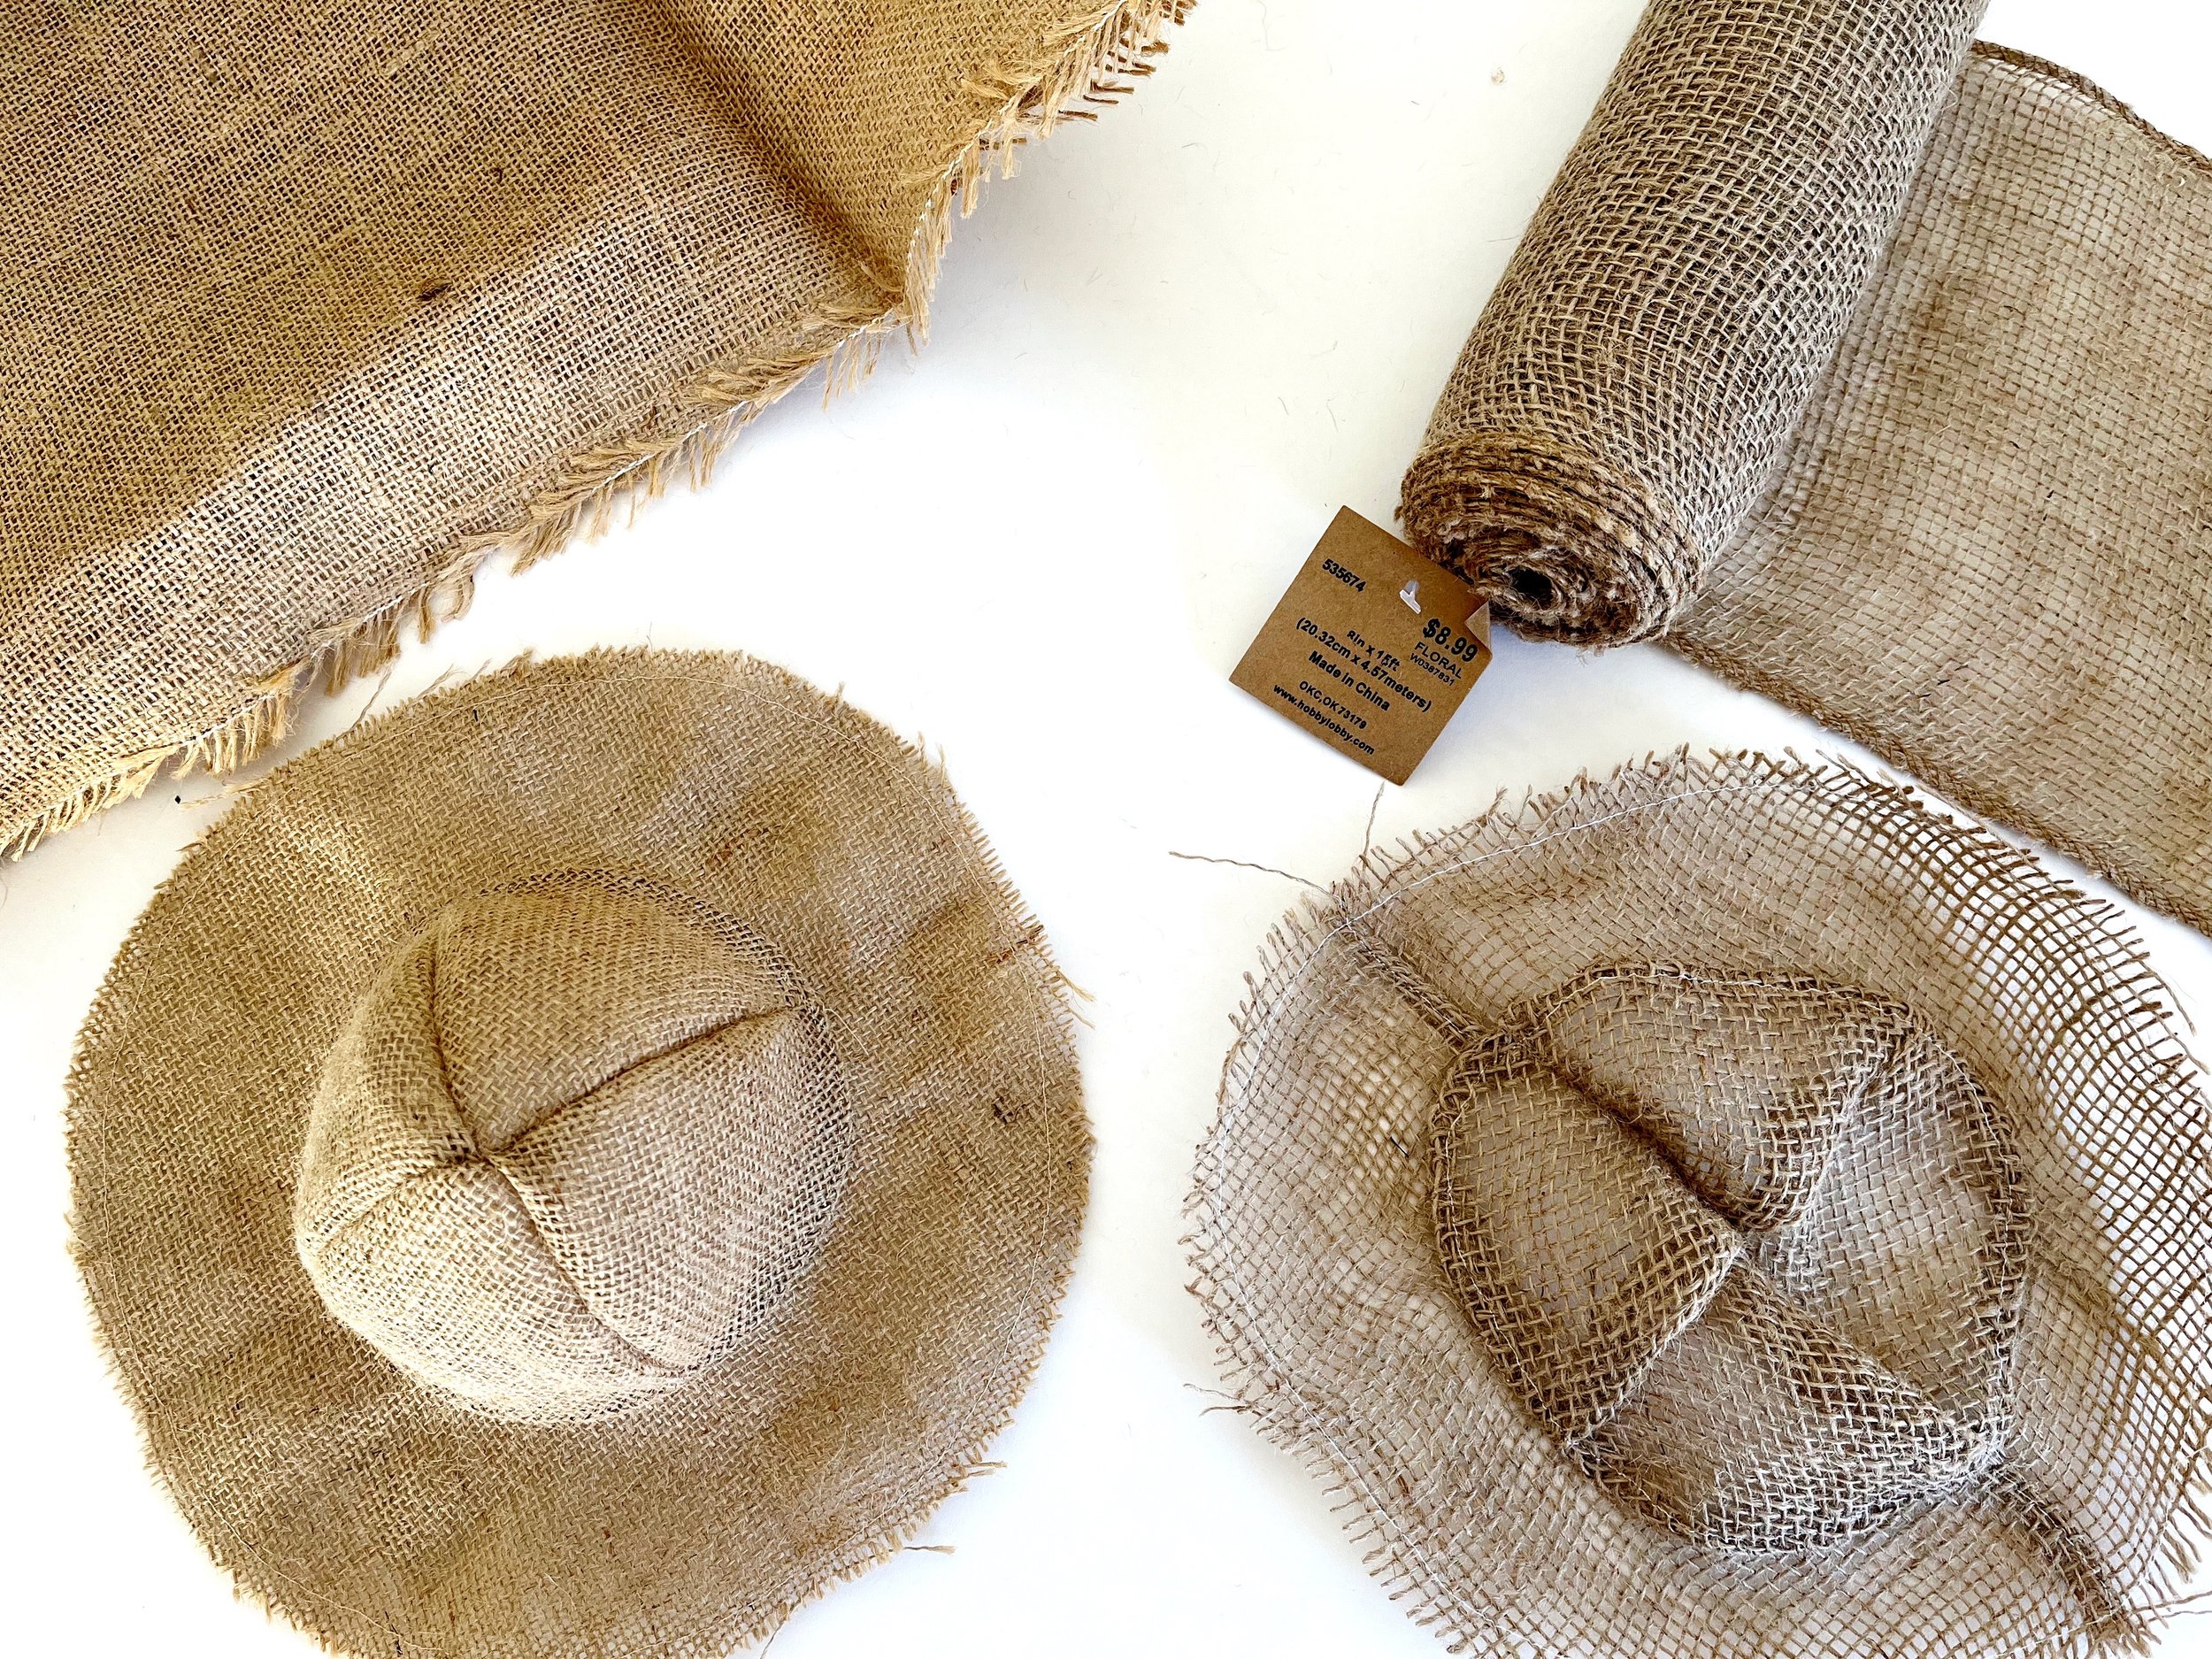 burlap sewing for kids. yarn, burlap pieces and kid plastic sewing needles.